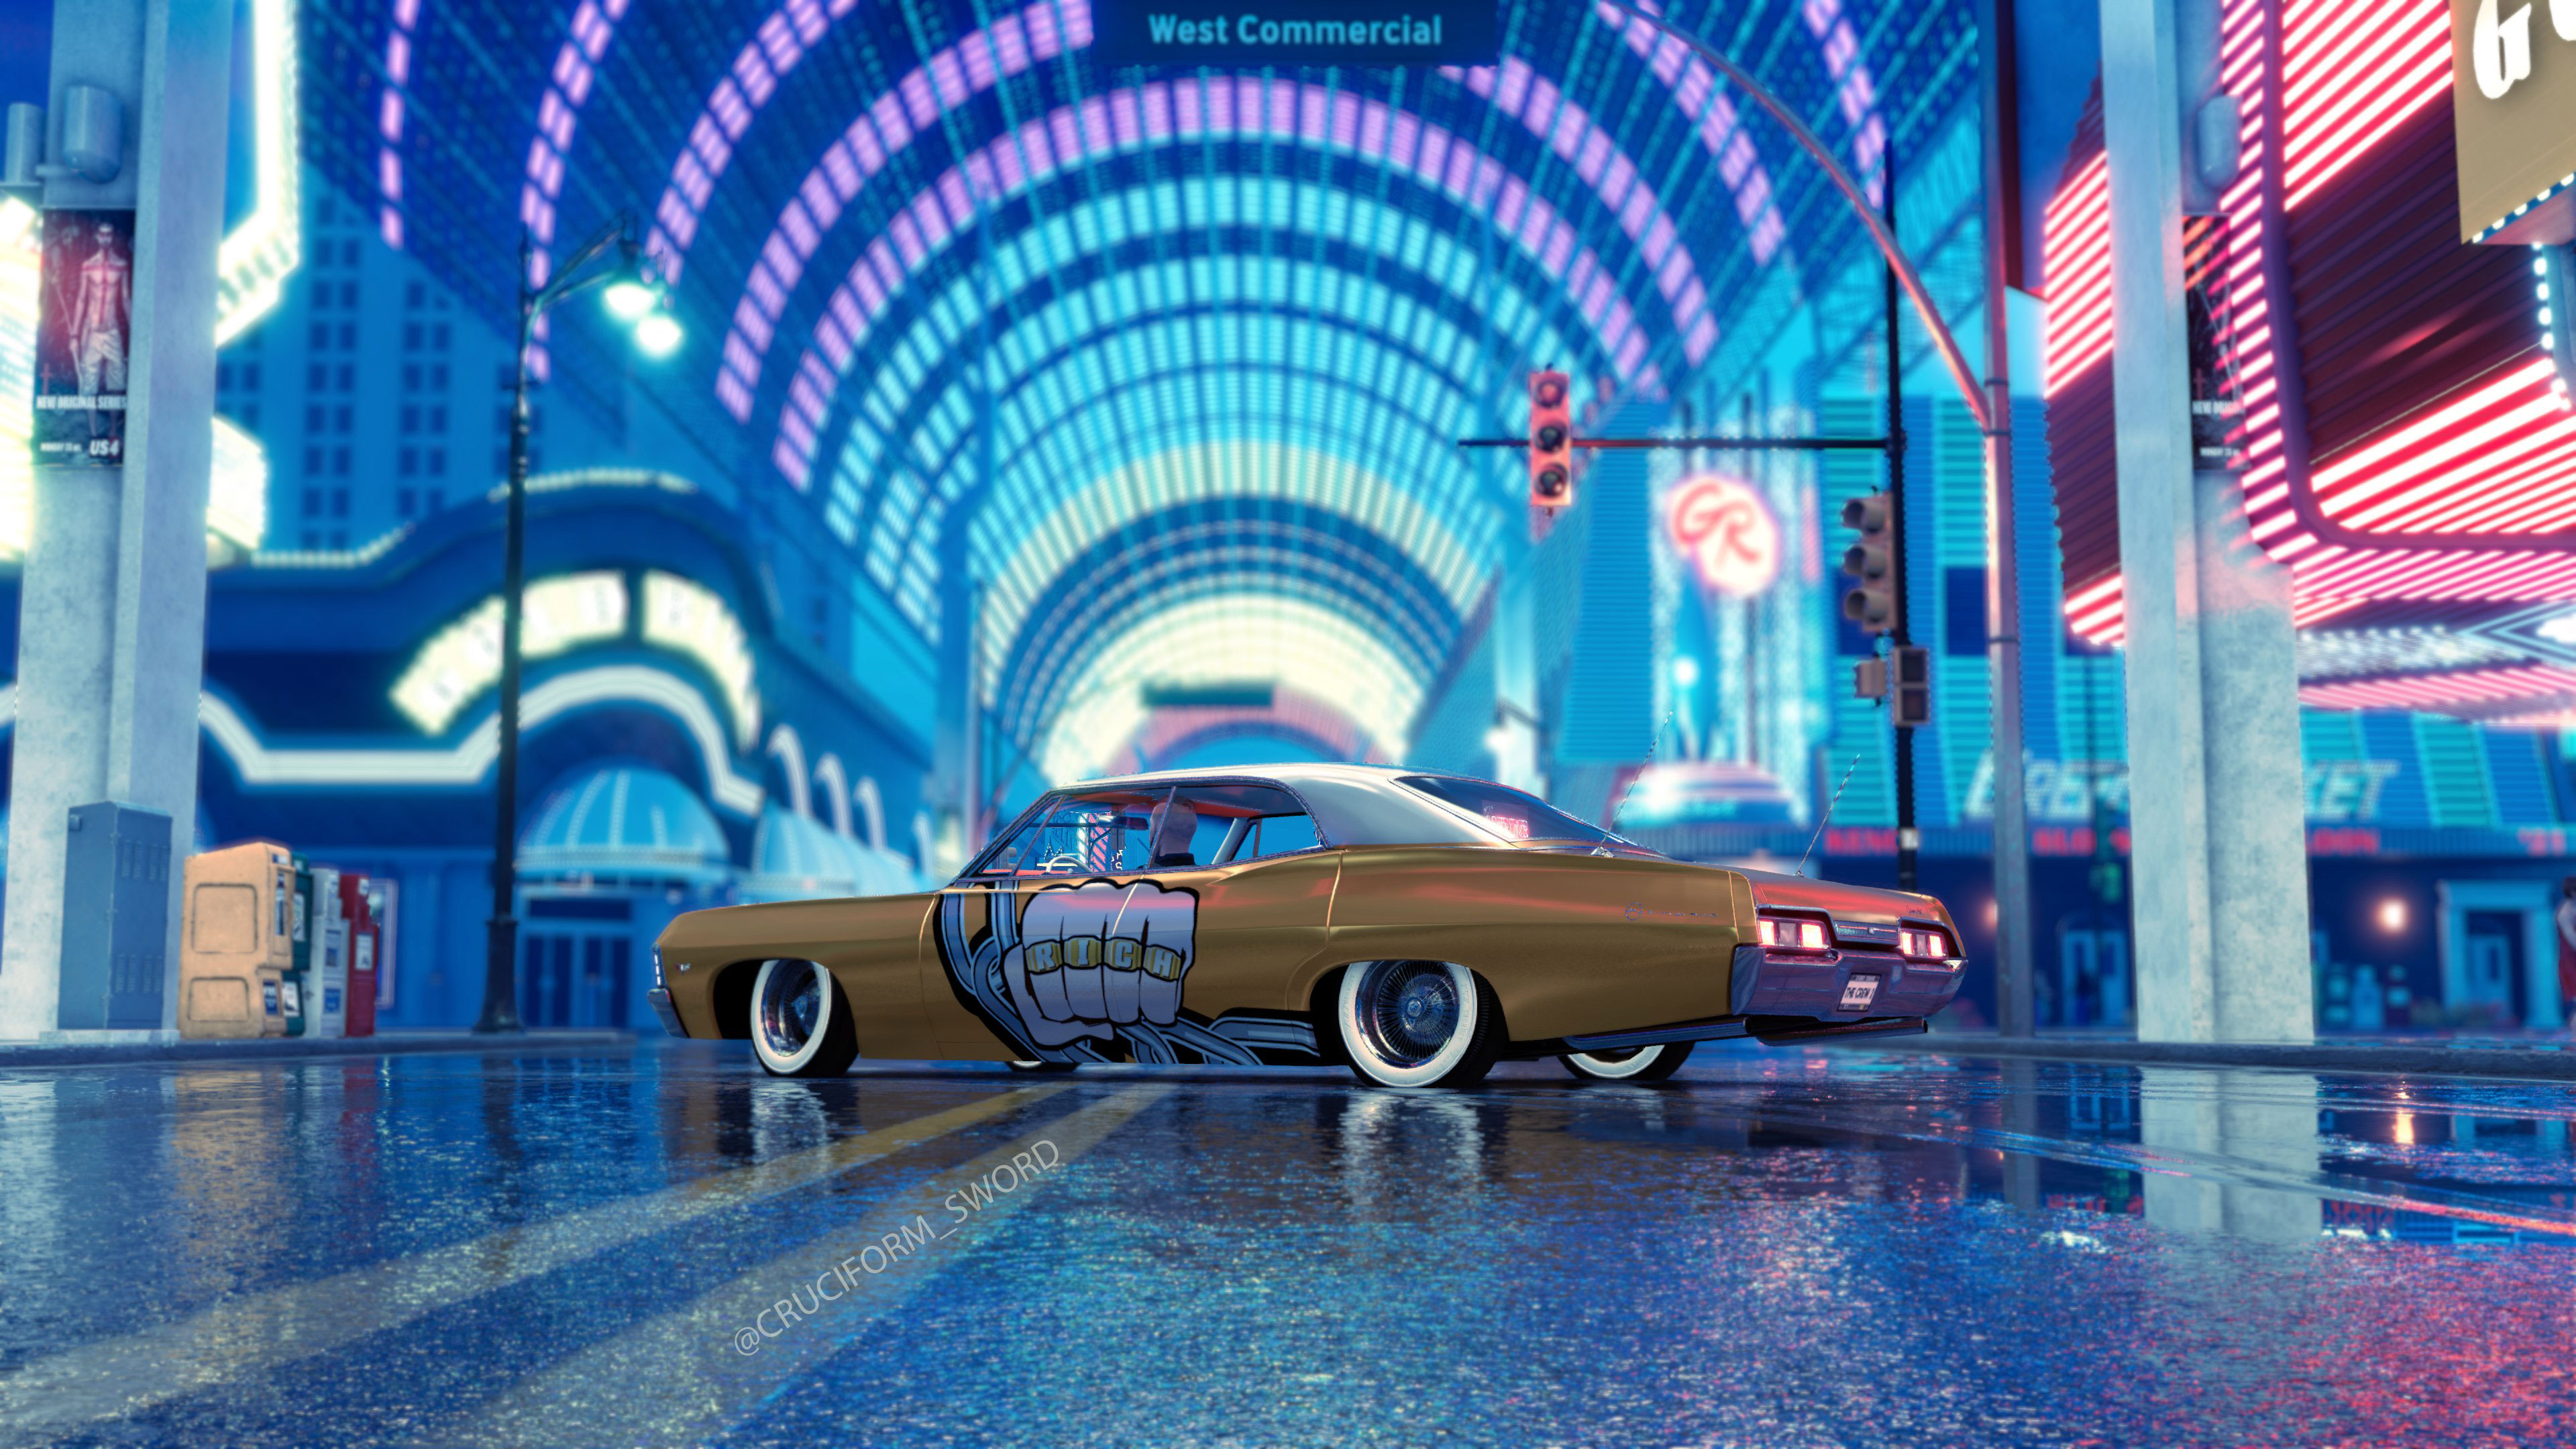 The Crew 2 Impala Chevrolet Impala In Game Screen Shot Video Games Game Poster Low Rider S 4K 3840x2160